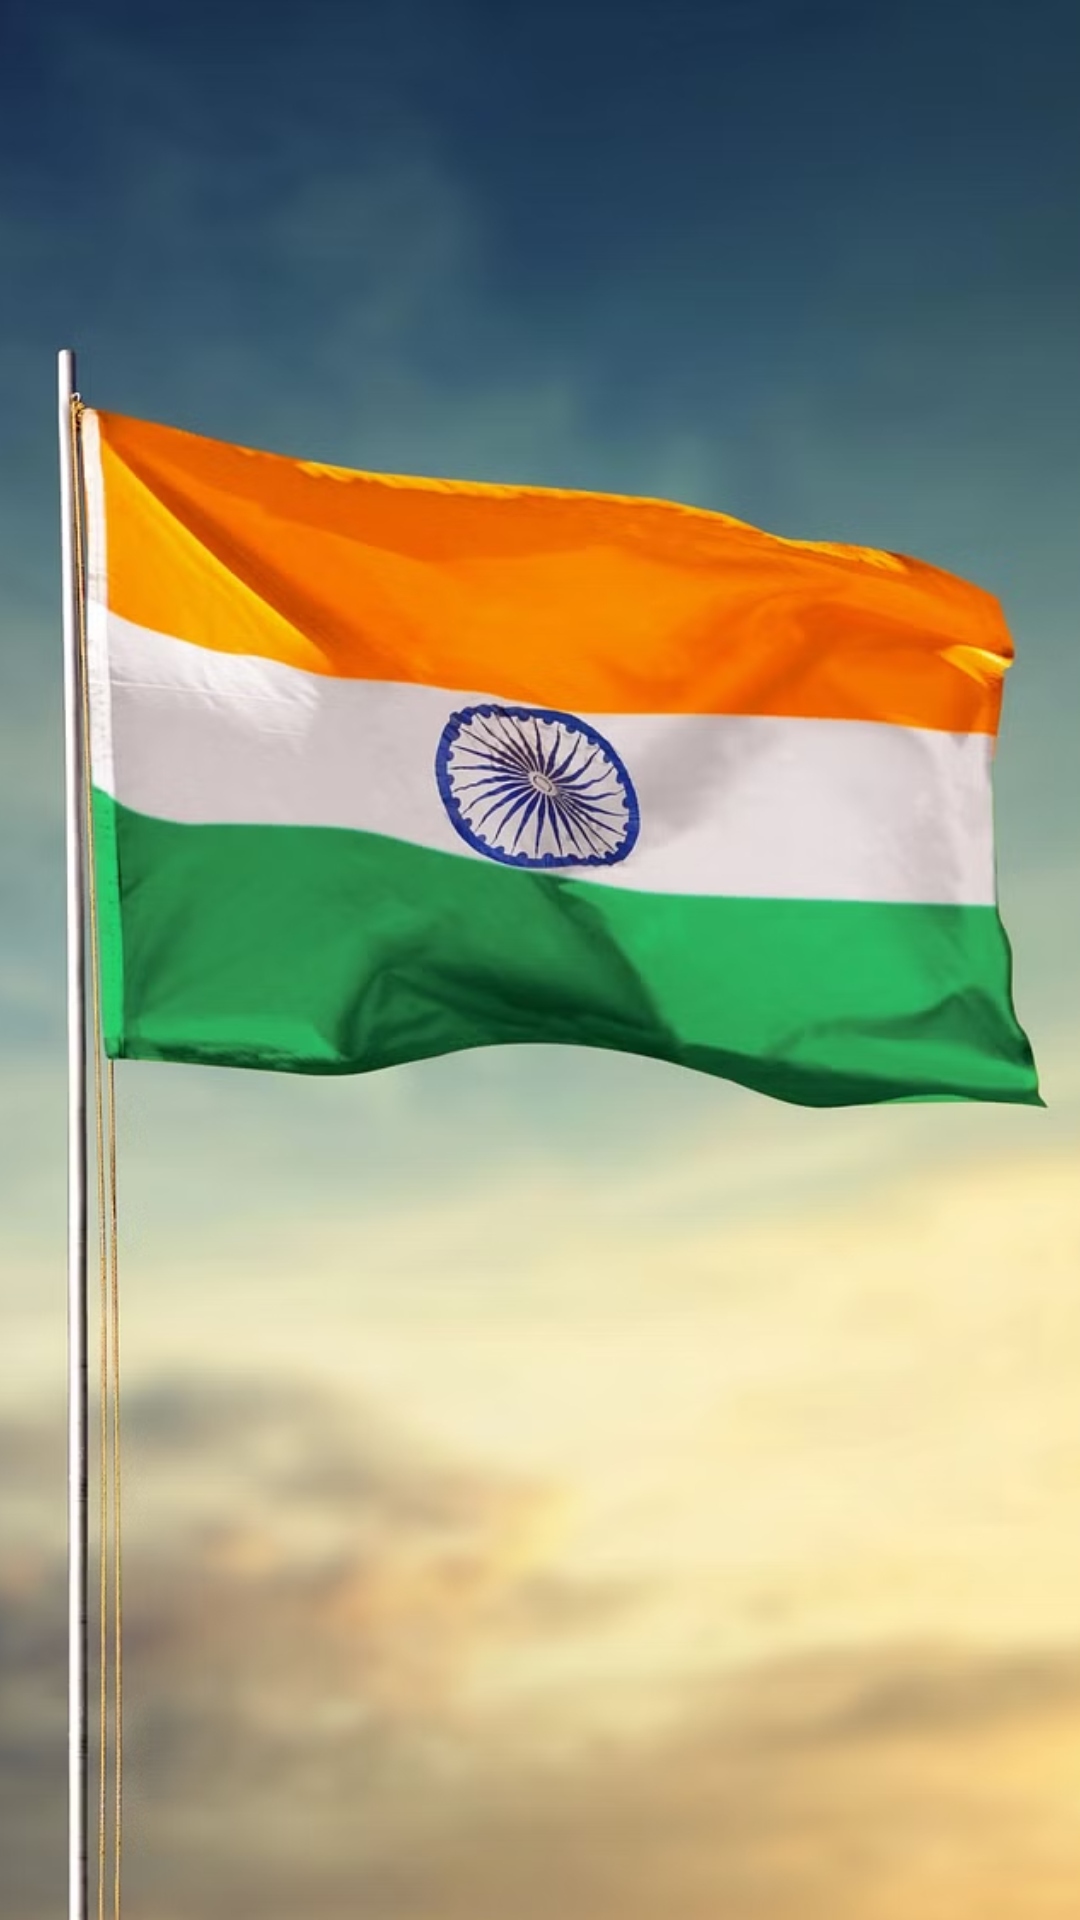 Know five countries that share Independence Day with India on 15th August